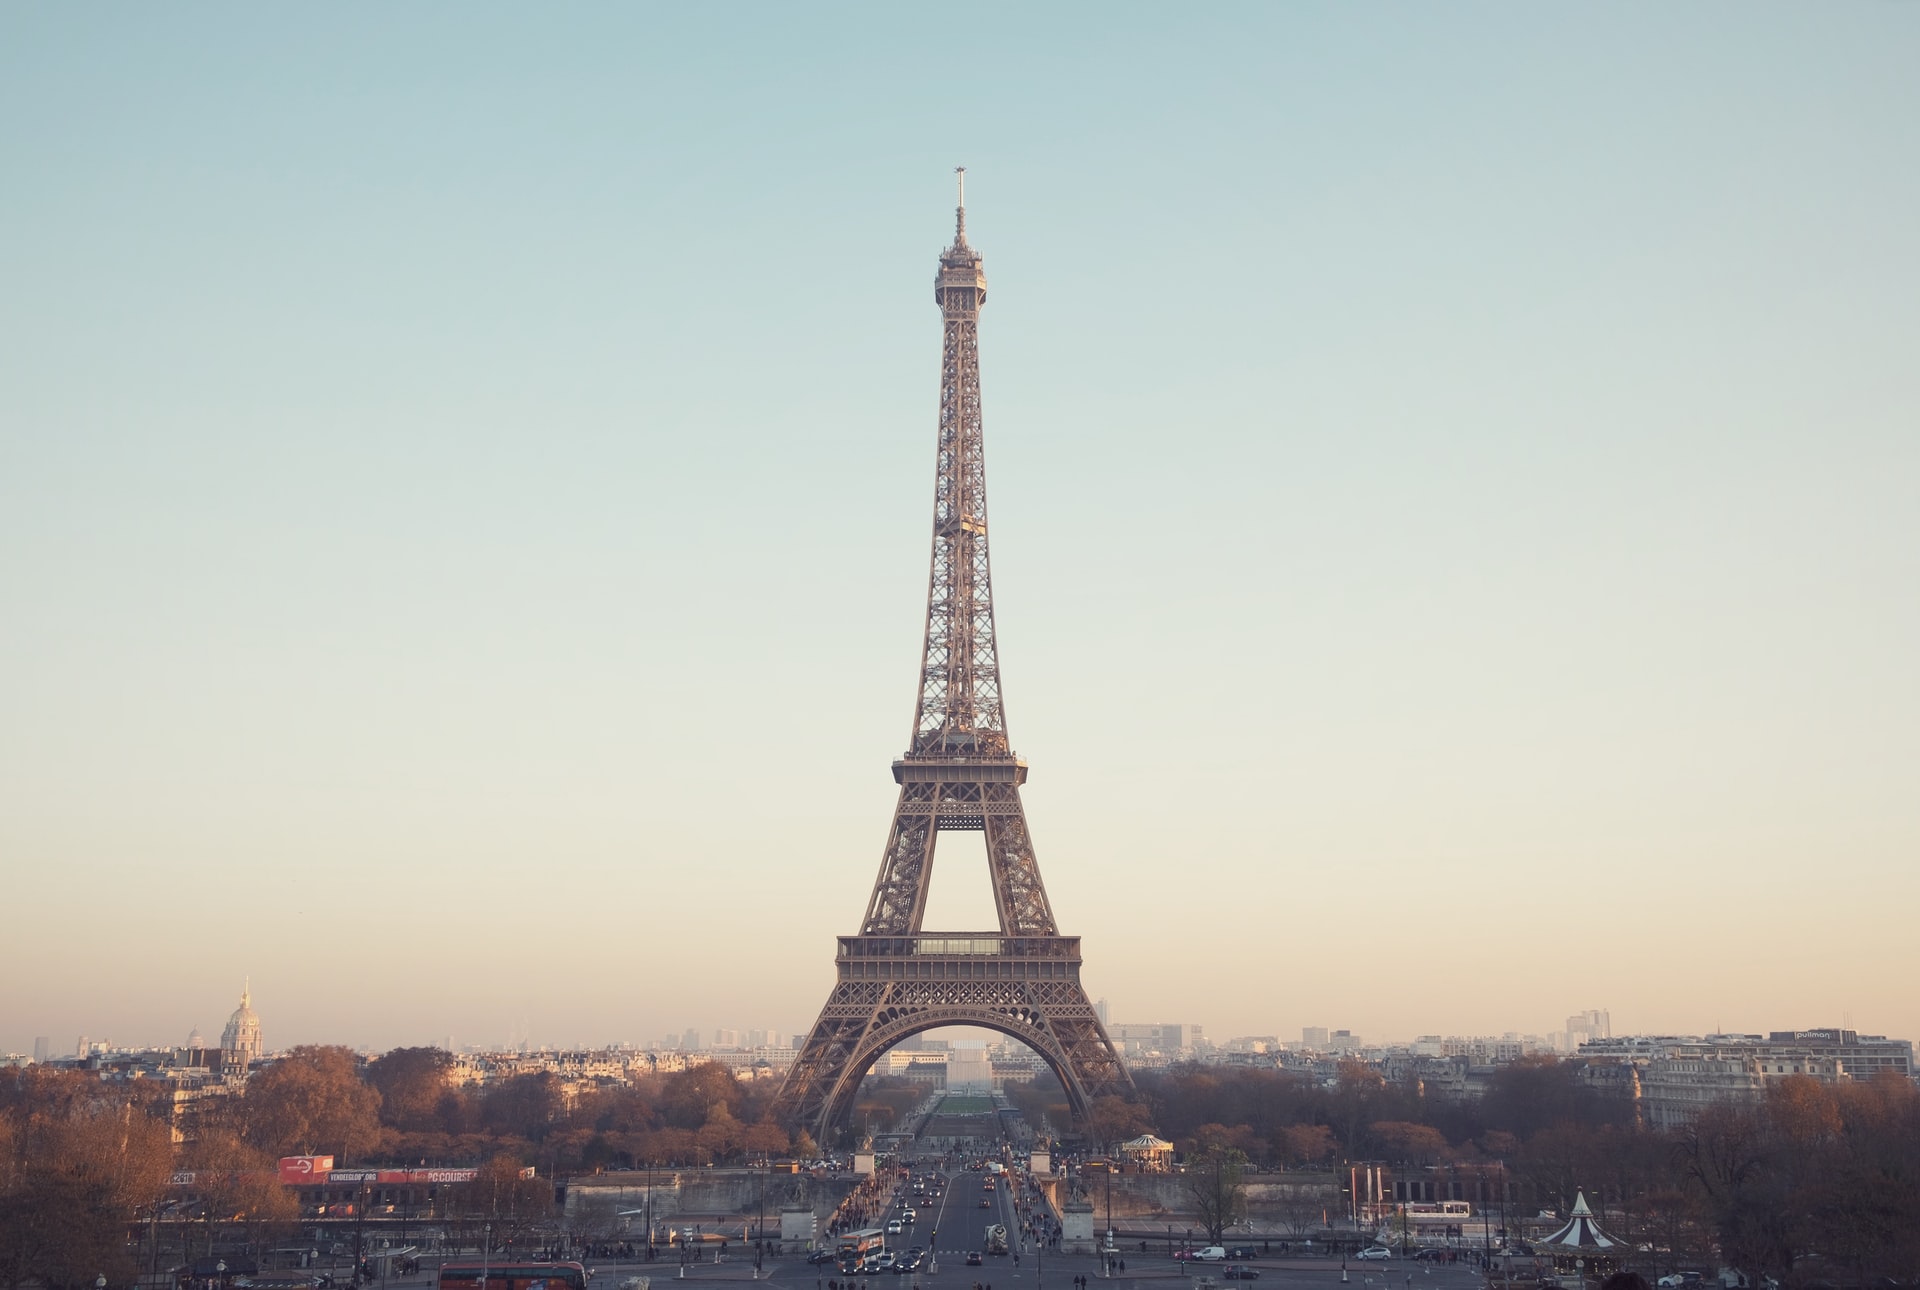 The Eiffel Tower is a wrought iron lattice tower on the Champ de Mars in Paris, France. - Eiffel Tower